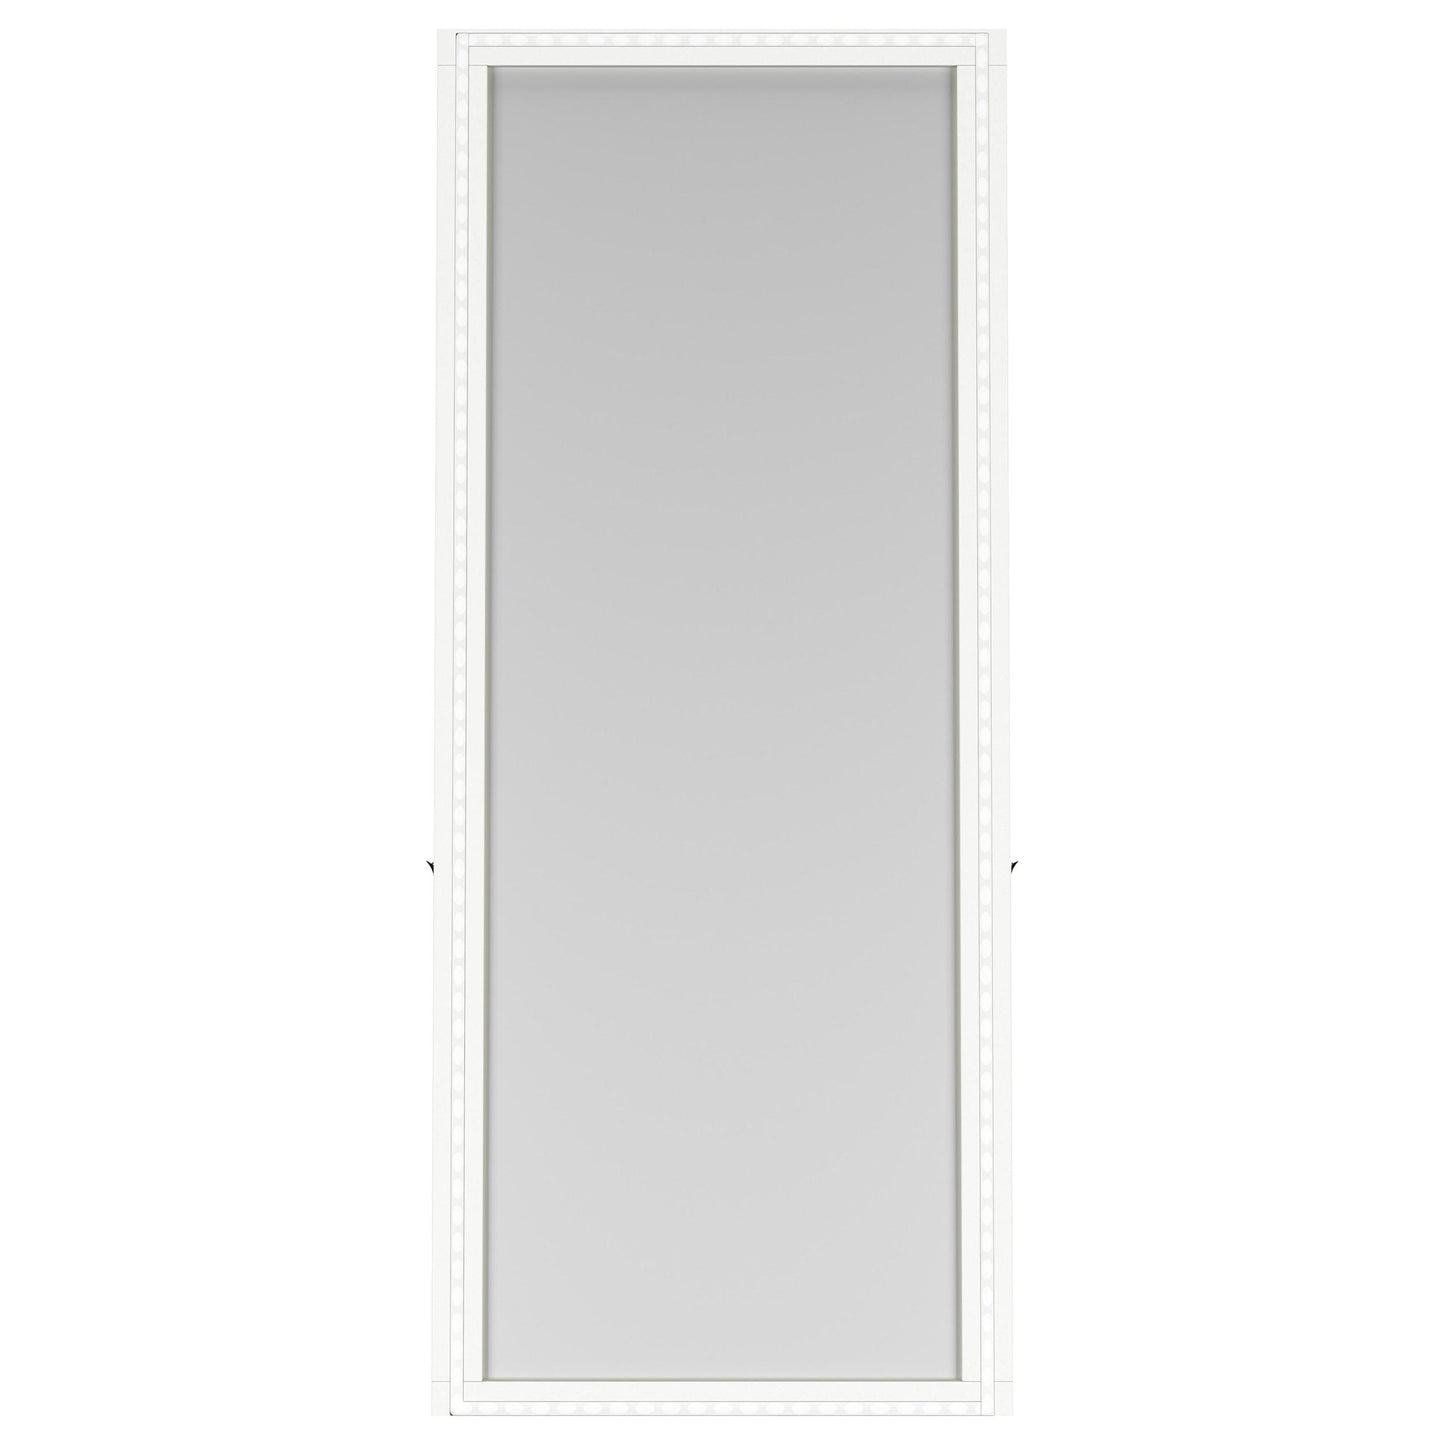 Windrose 28 x 67 Inch Tempered LED Standing Mirror White